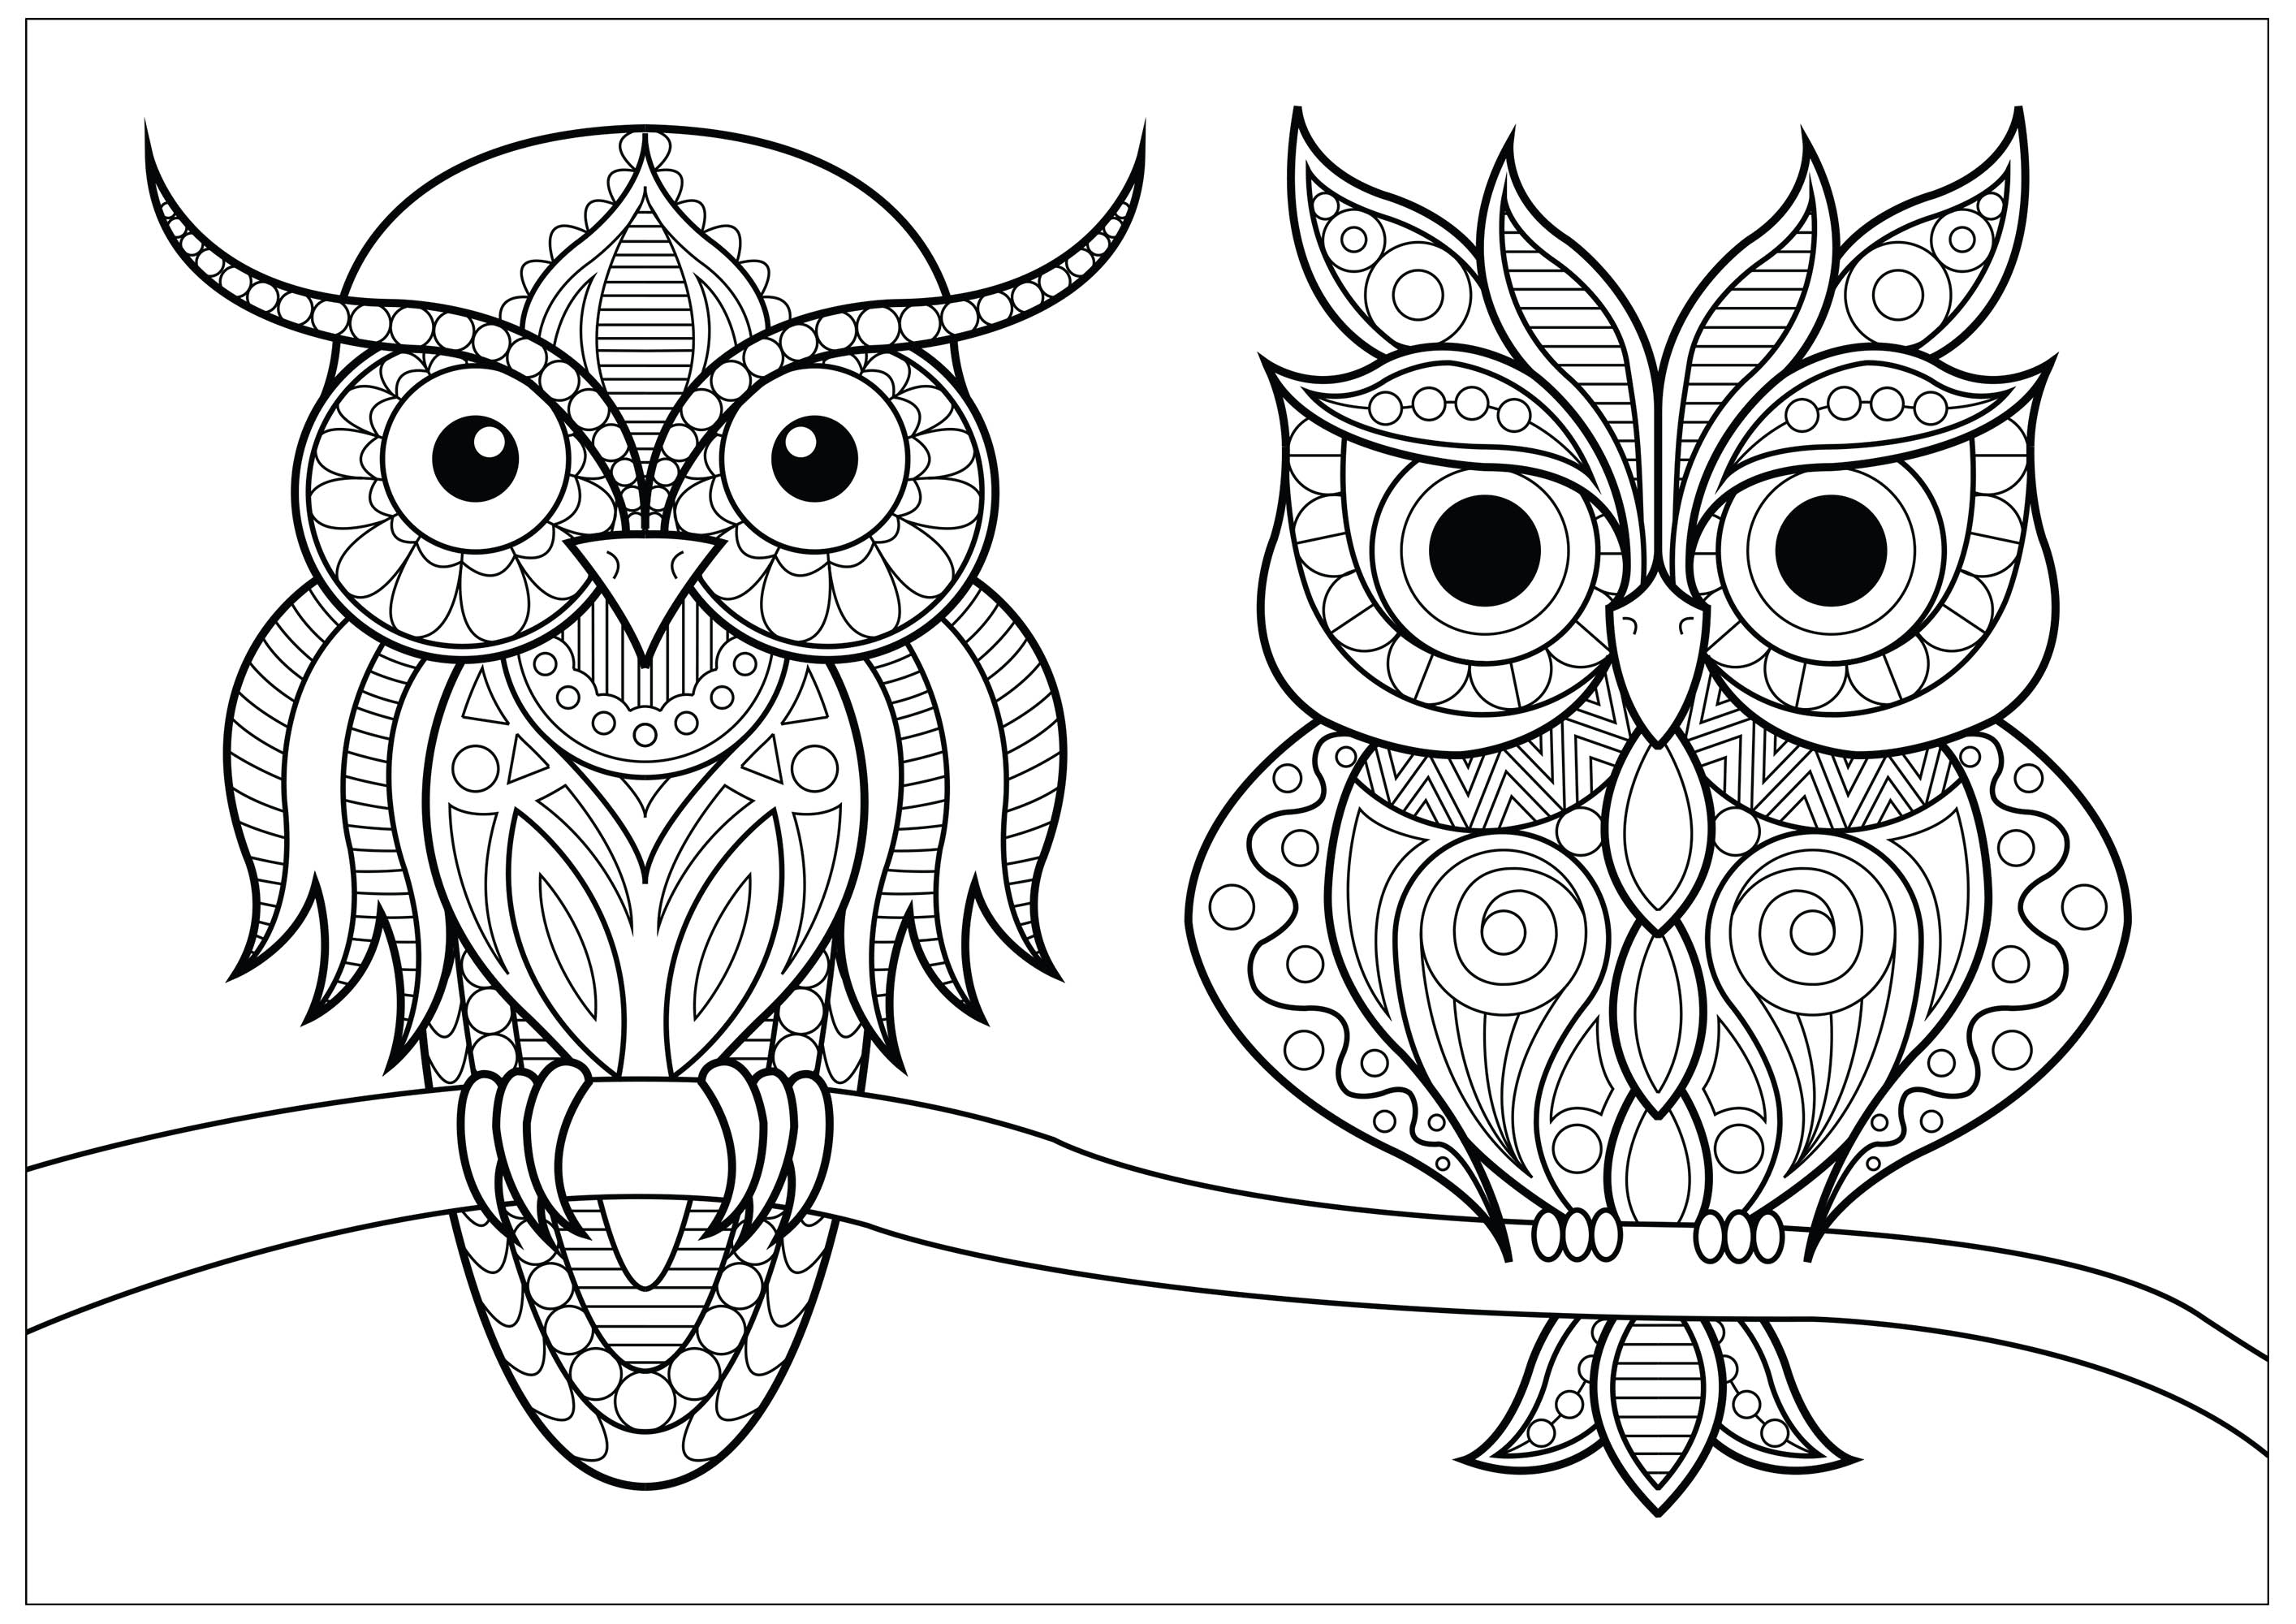 Download Two owls with simple patterns on branch - Owls Adult ...